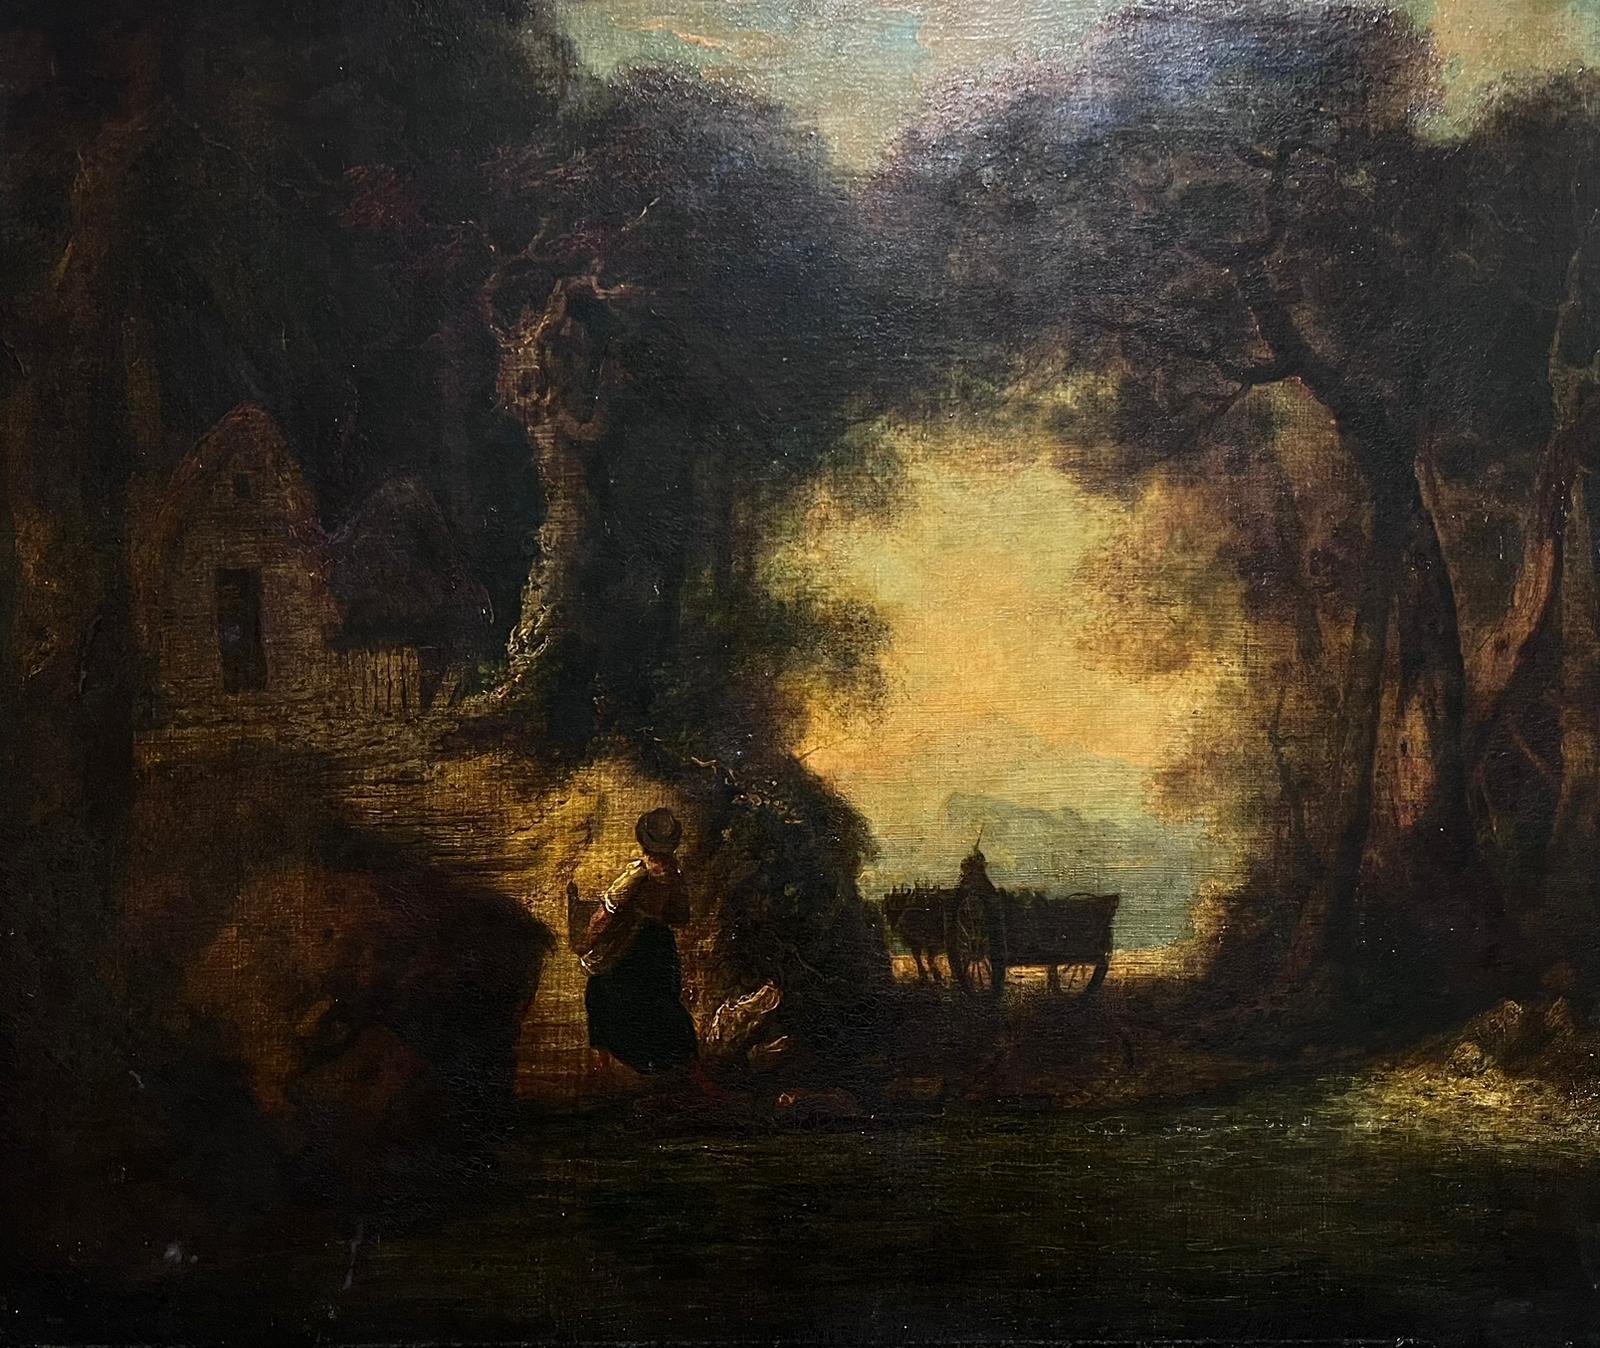 circle of Thomas Gainsborough  Figurative Painting - Large 18th Century British Old Master Oil Painting Figures at Dusk in Woodland